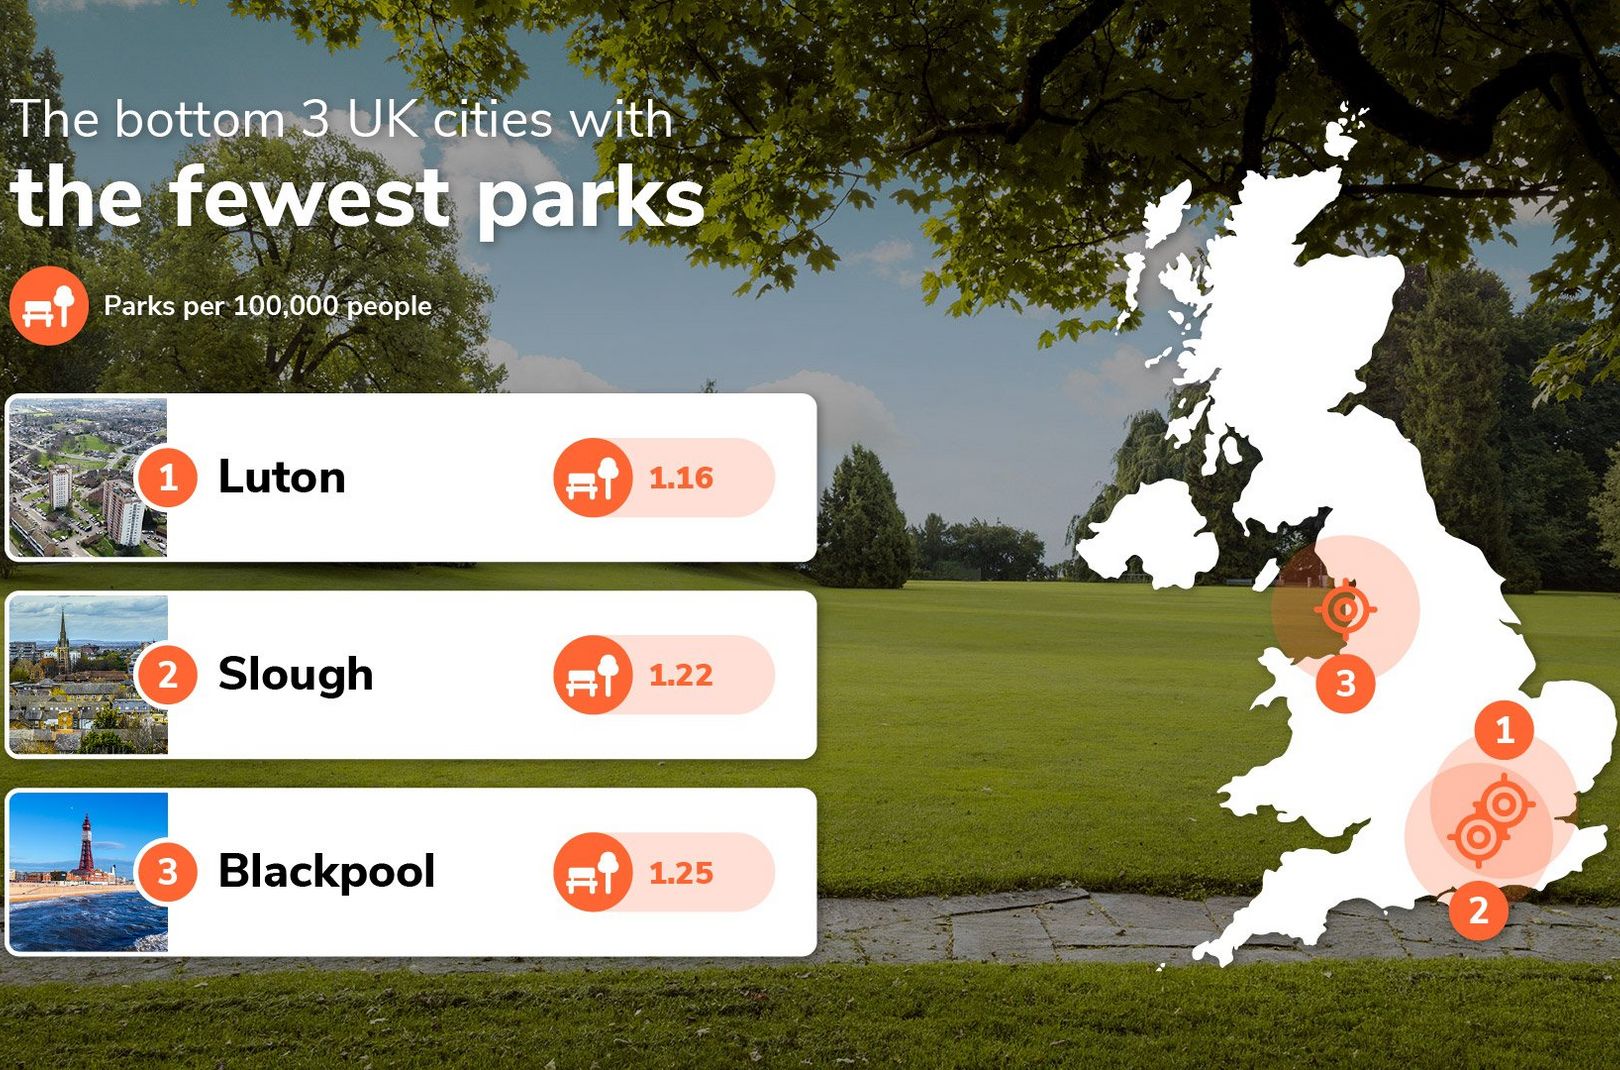 The UK’s cities with the fewest parks